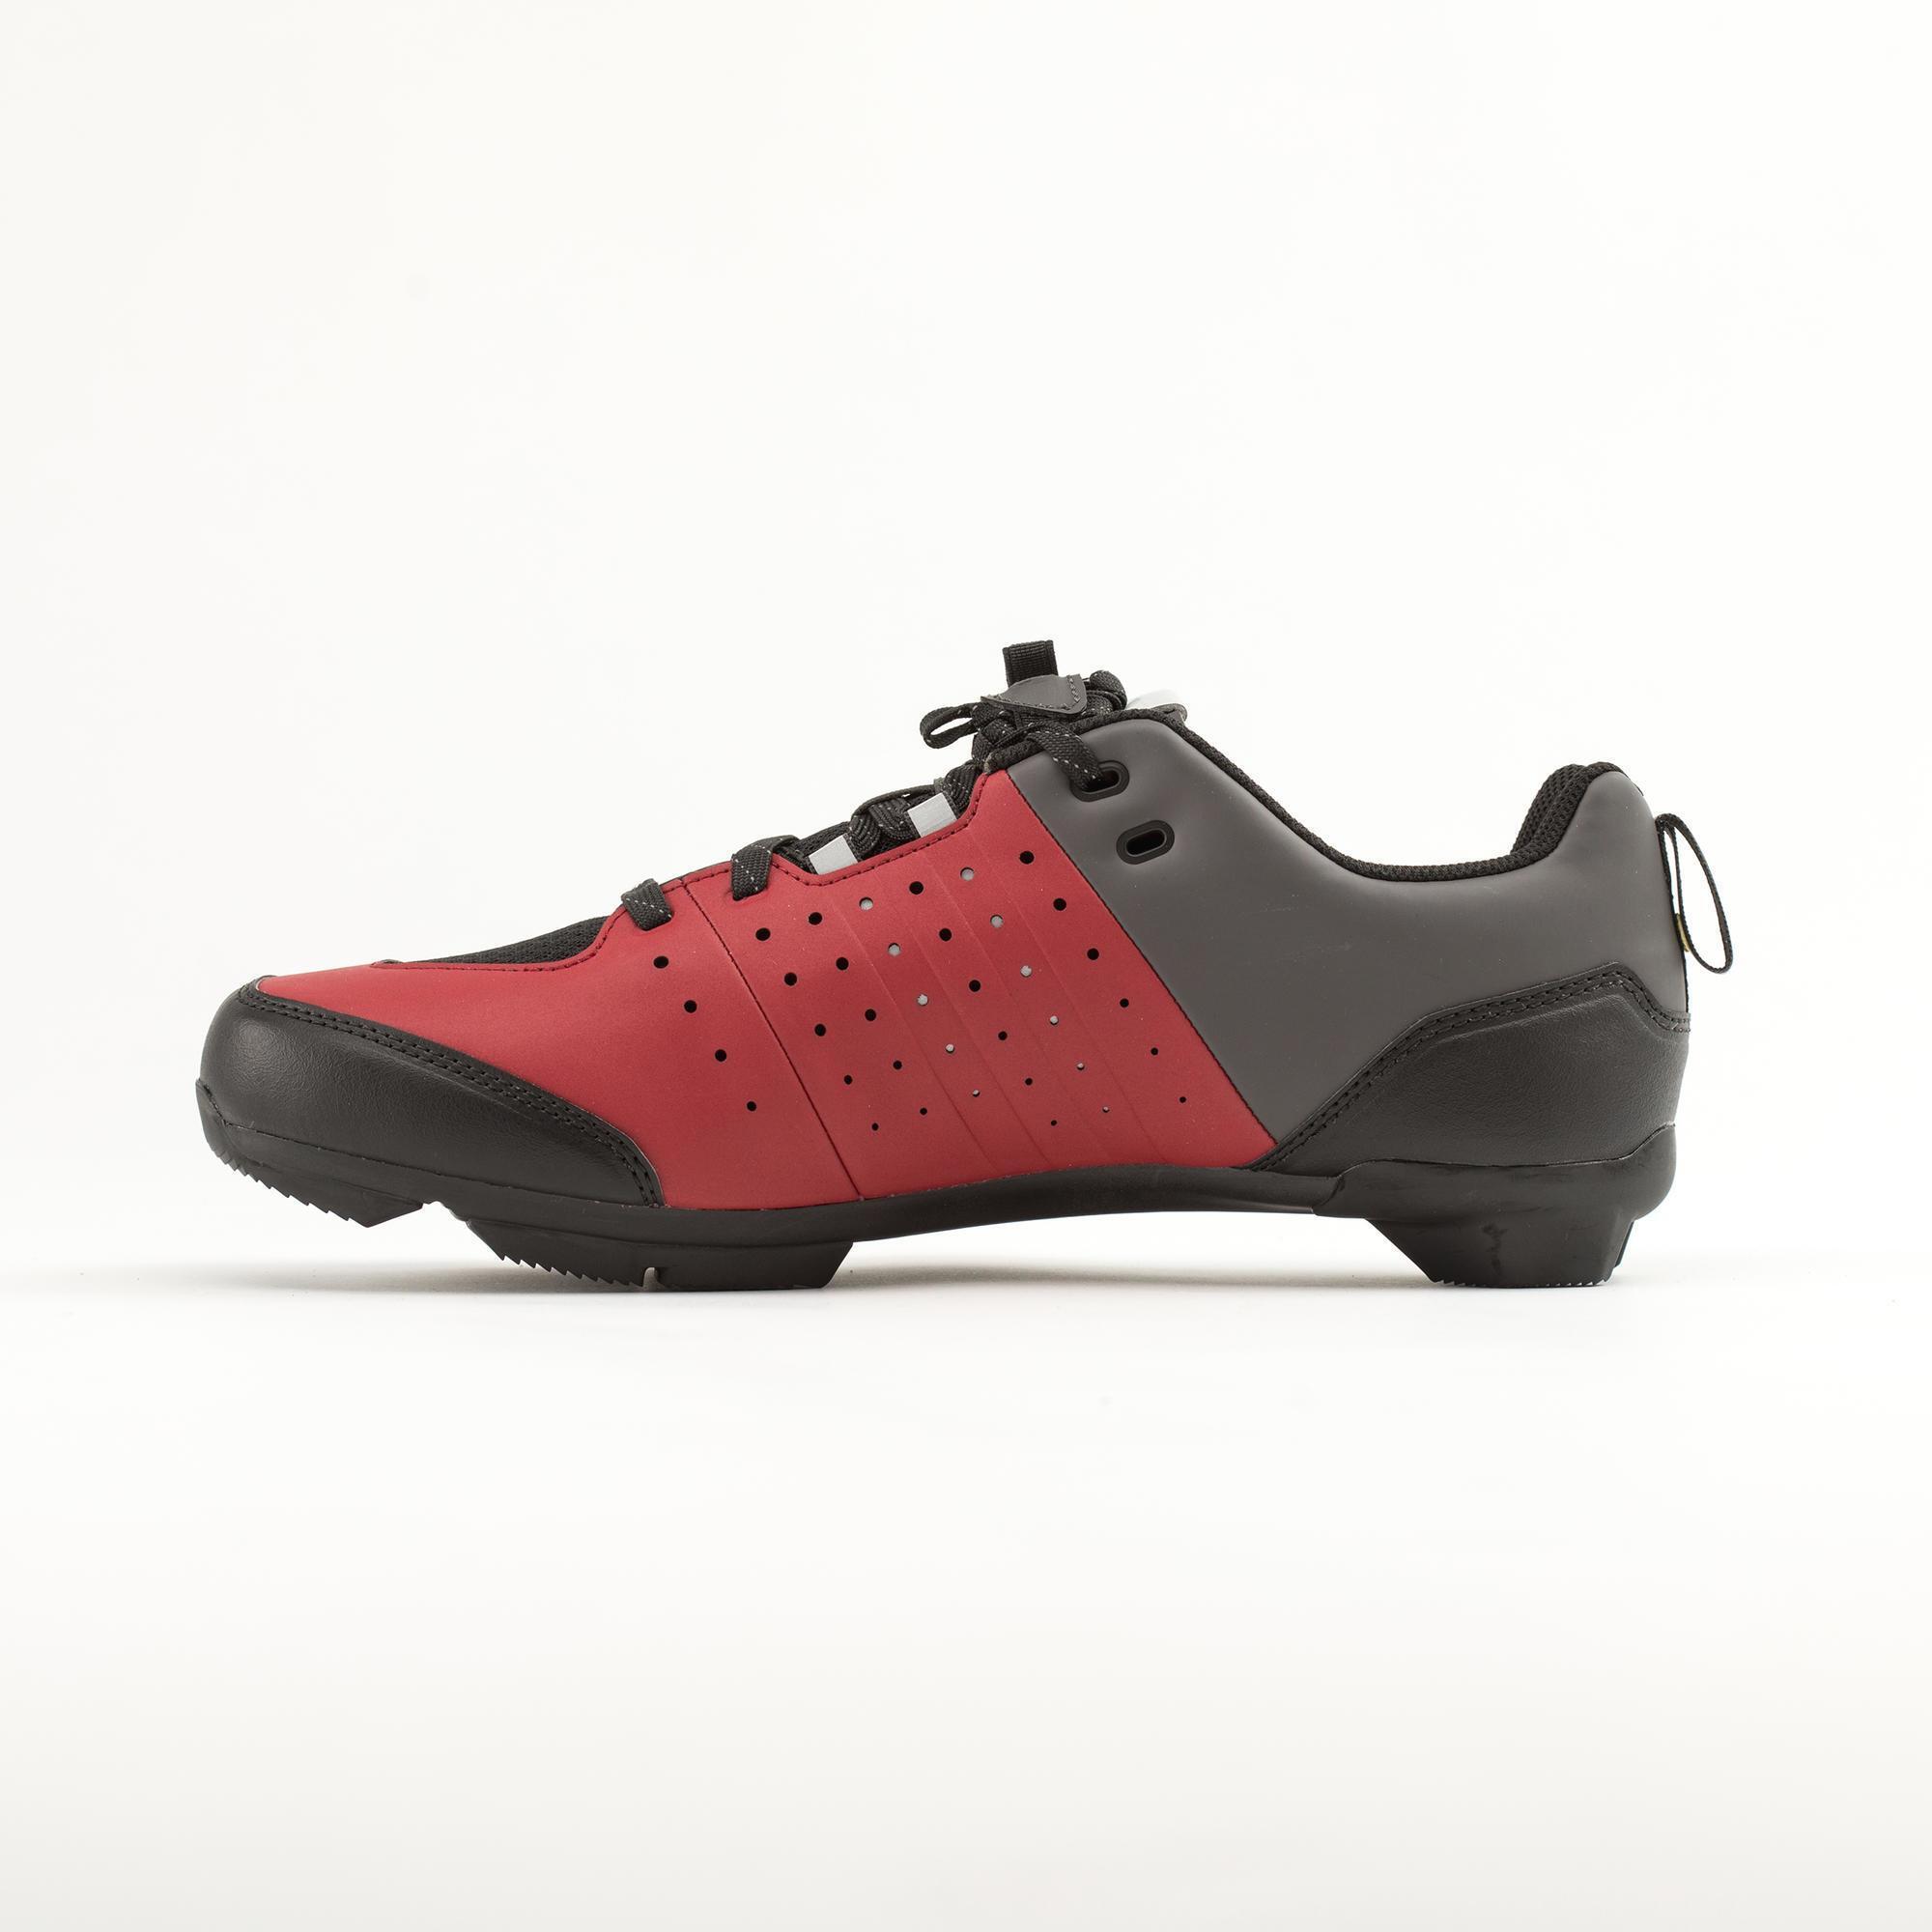 Road and Gravel Cycling Lace-Up SPD Shoes GRVL 500 - Burgundy / Grey 5/7